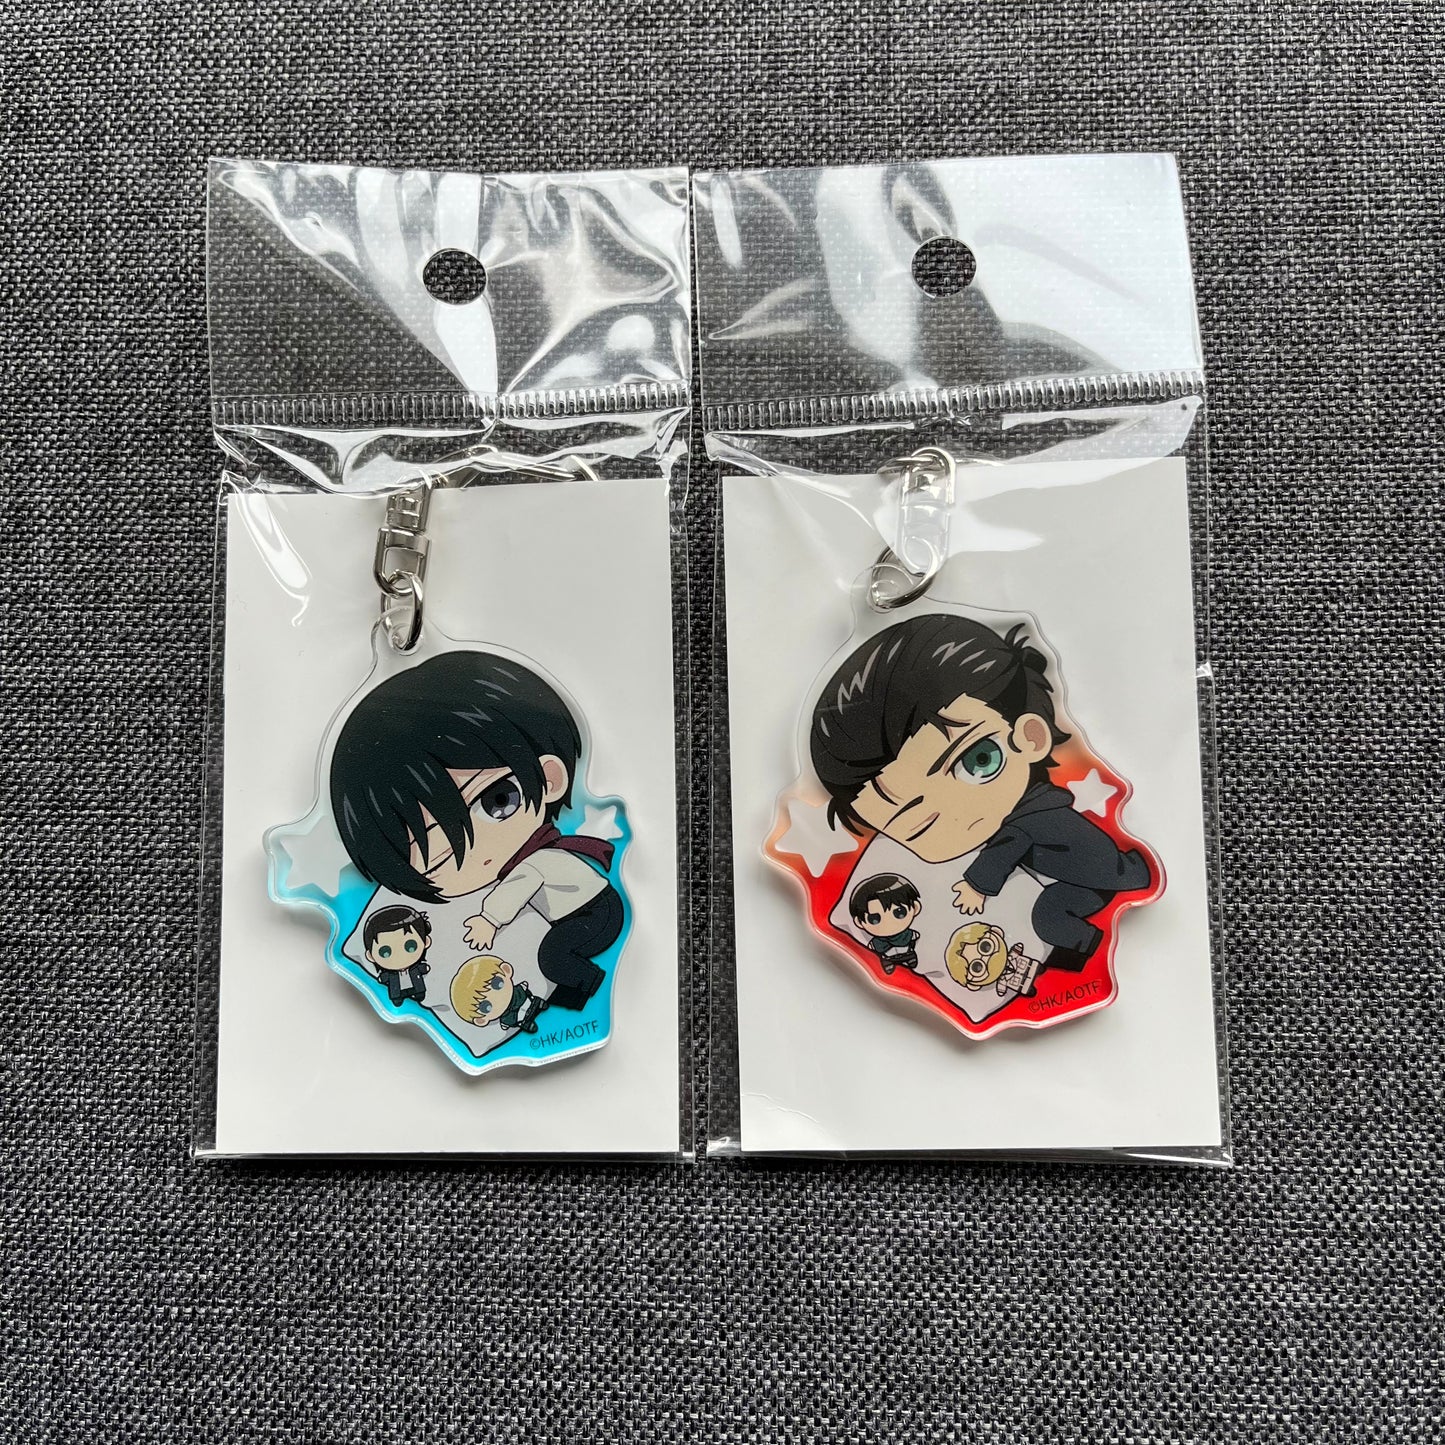 Attack on Titan Acrylic Charms